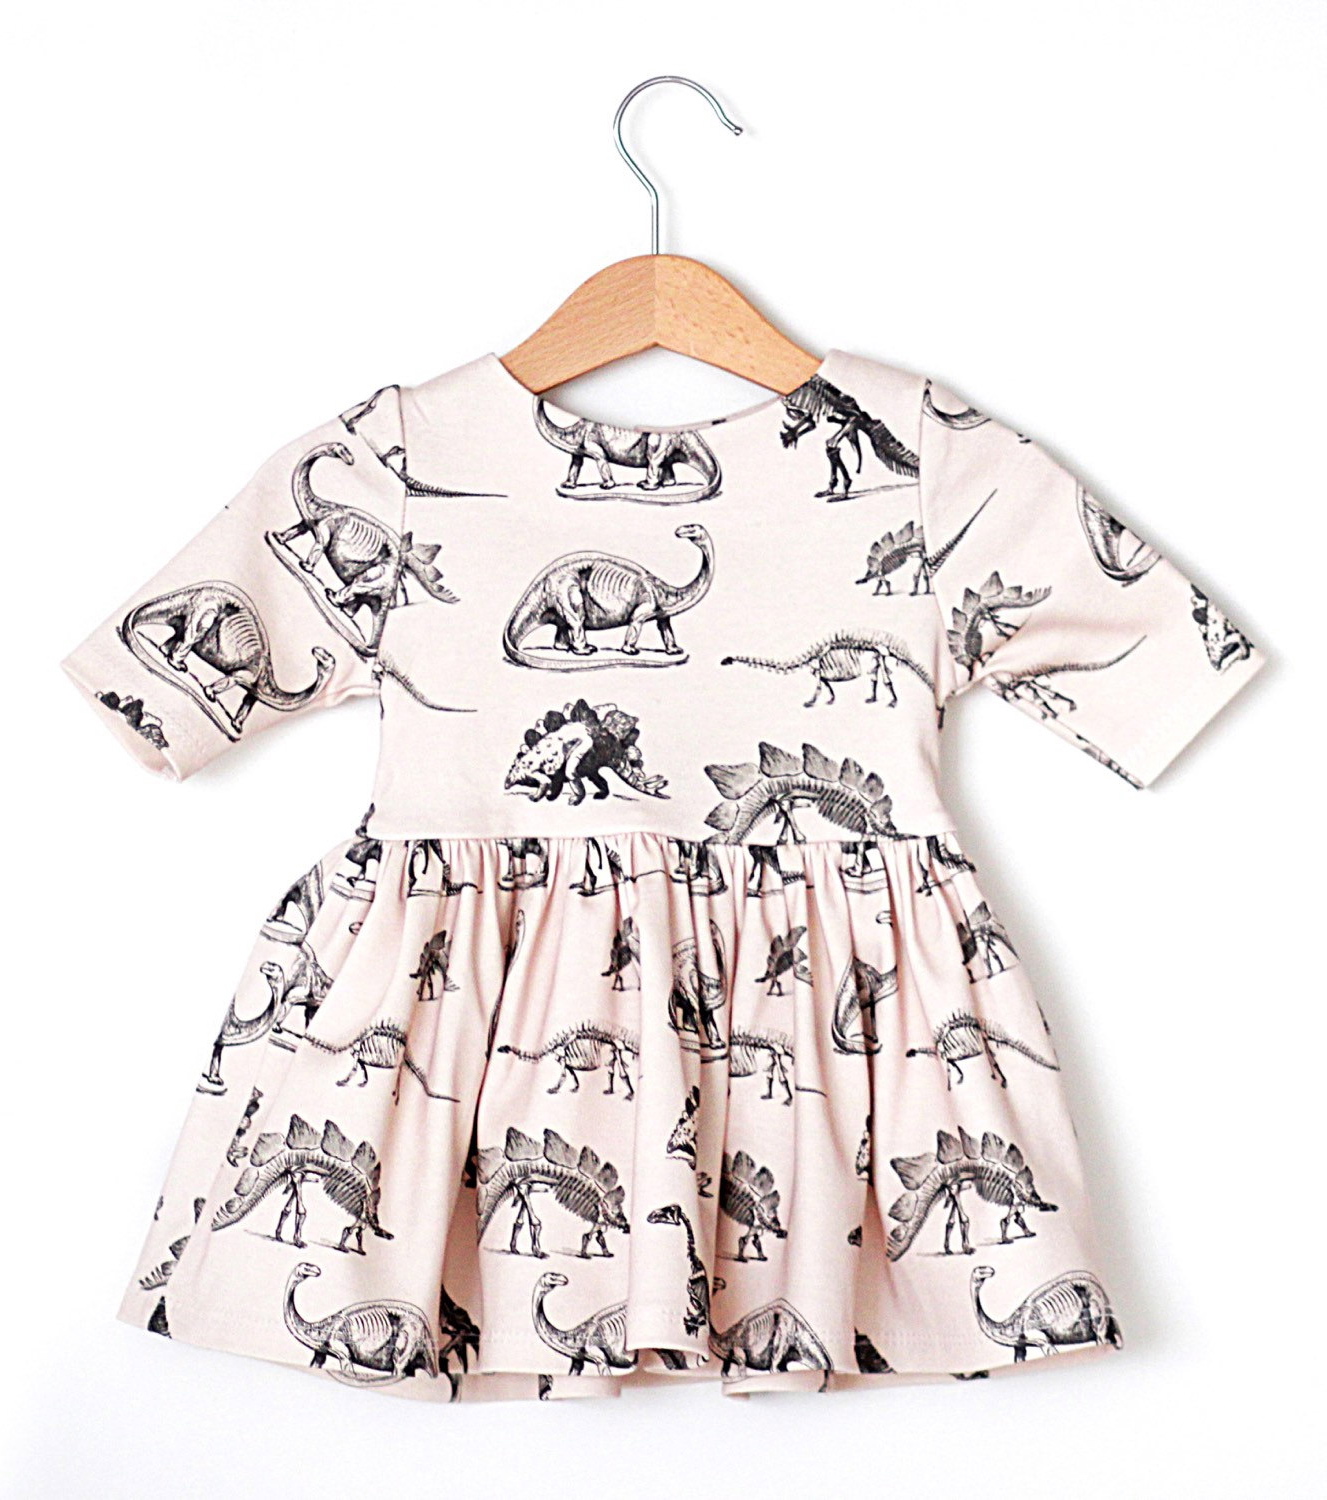 Best of Etsy: Rocky Racoon Organic Baby Apparel